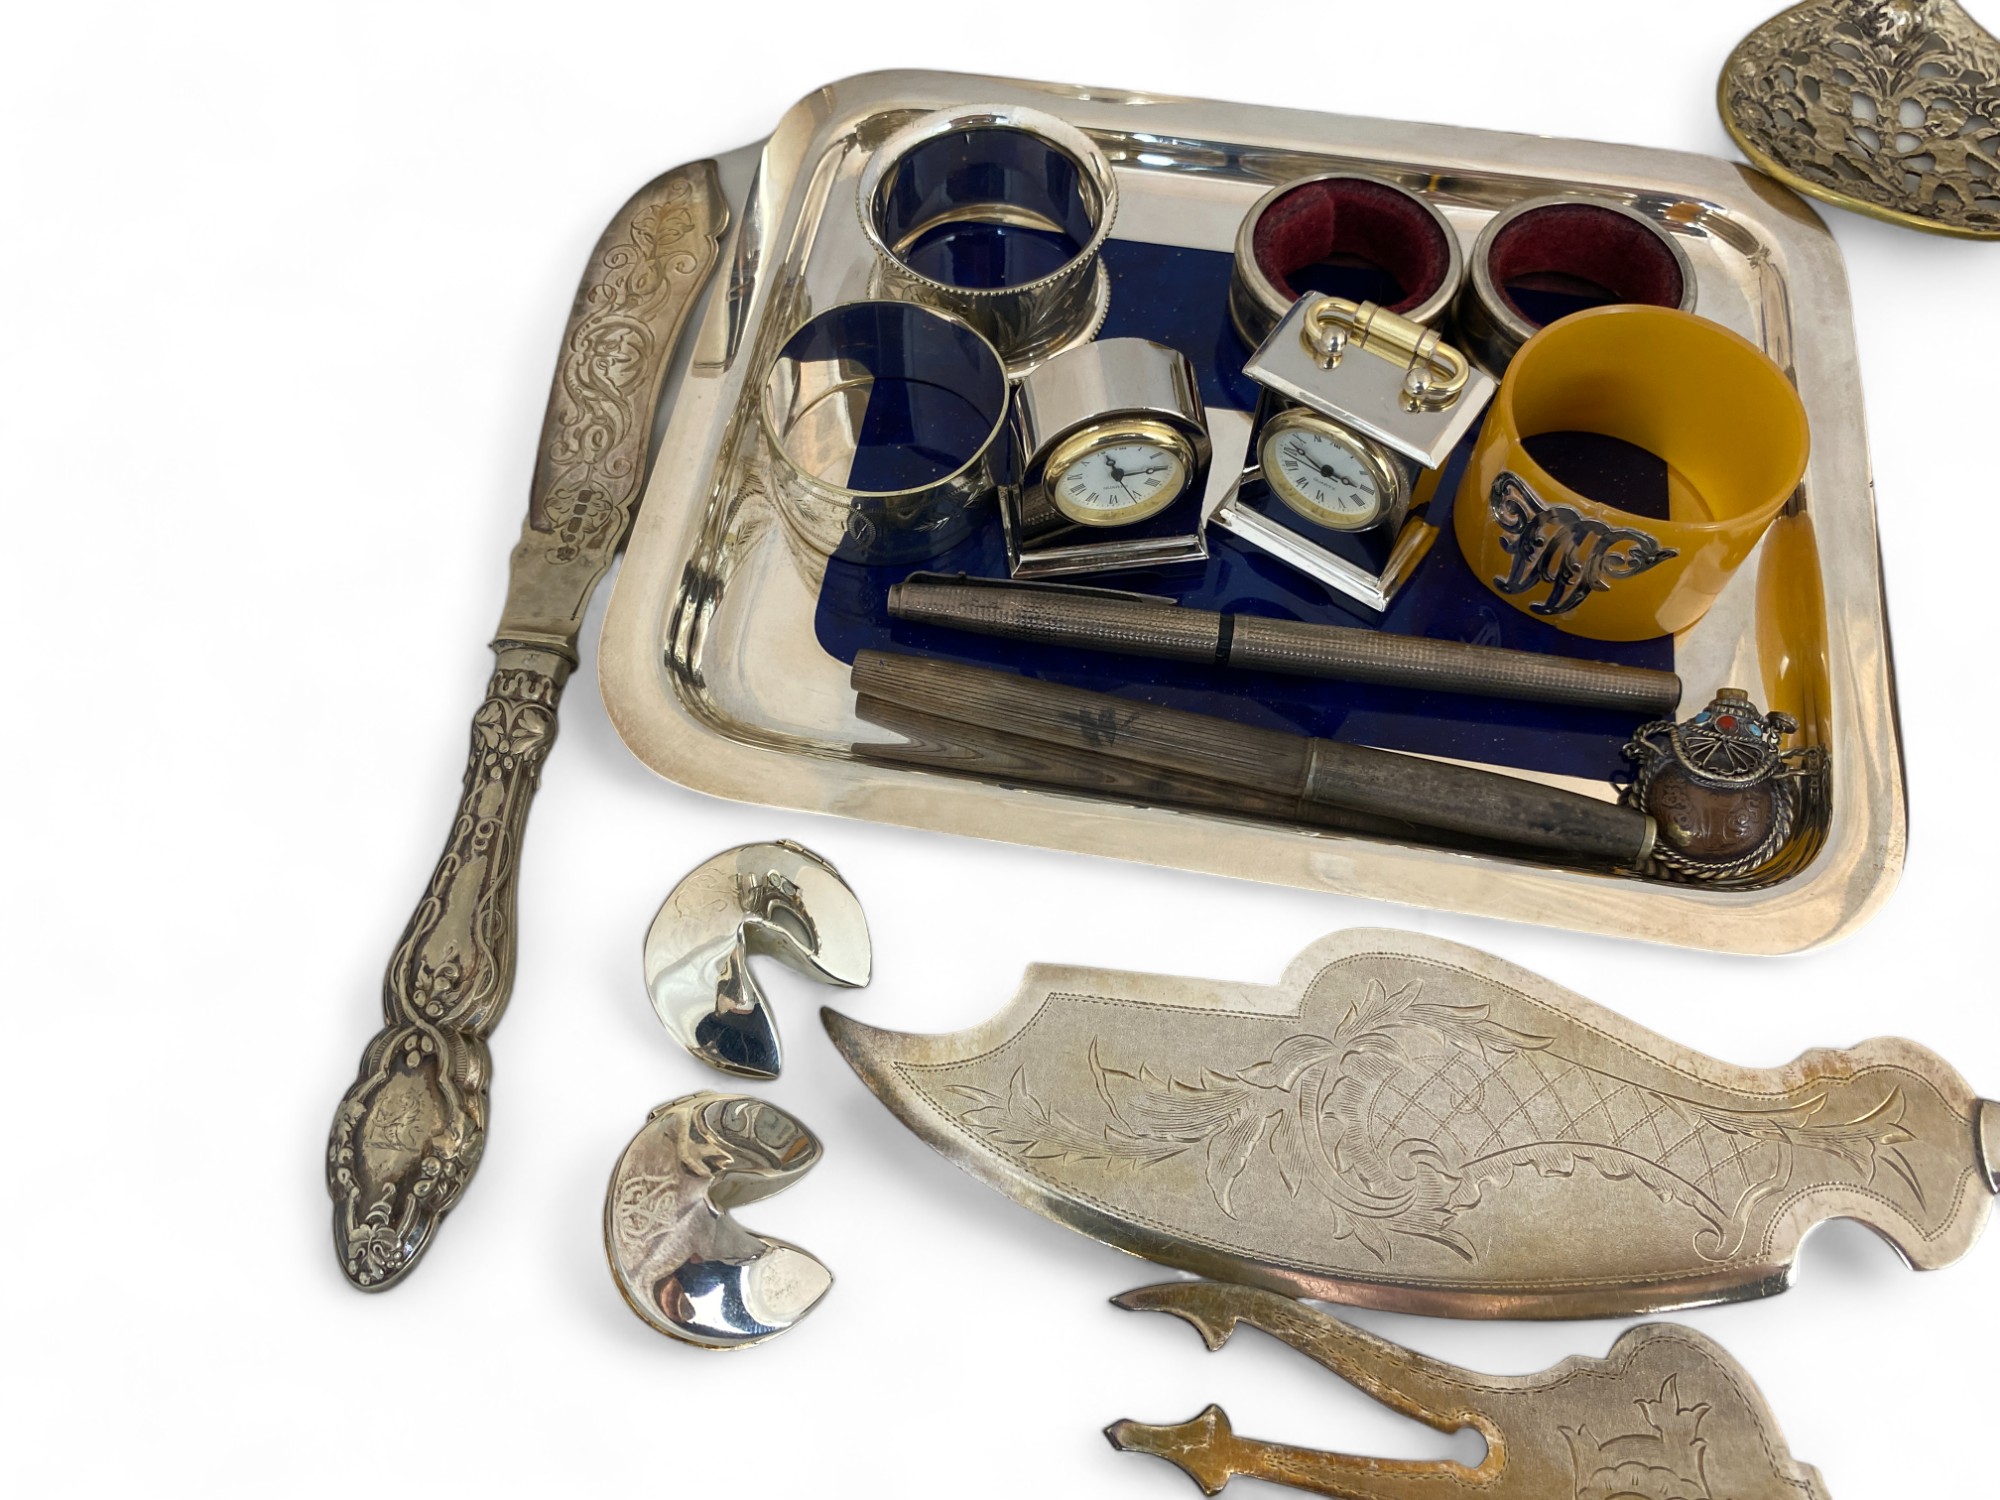 A group lot of silver plate and objects de vertu - Image 3 of 6